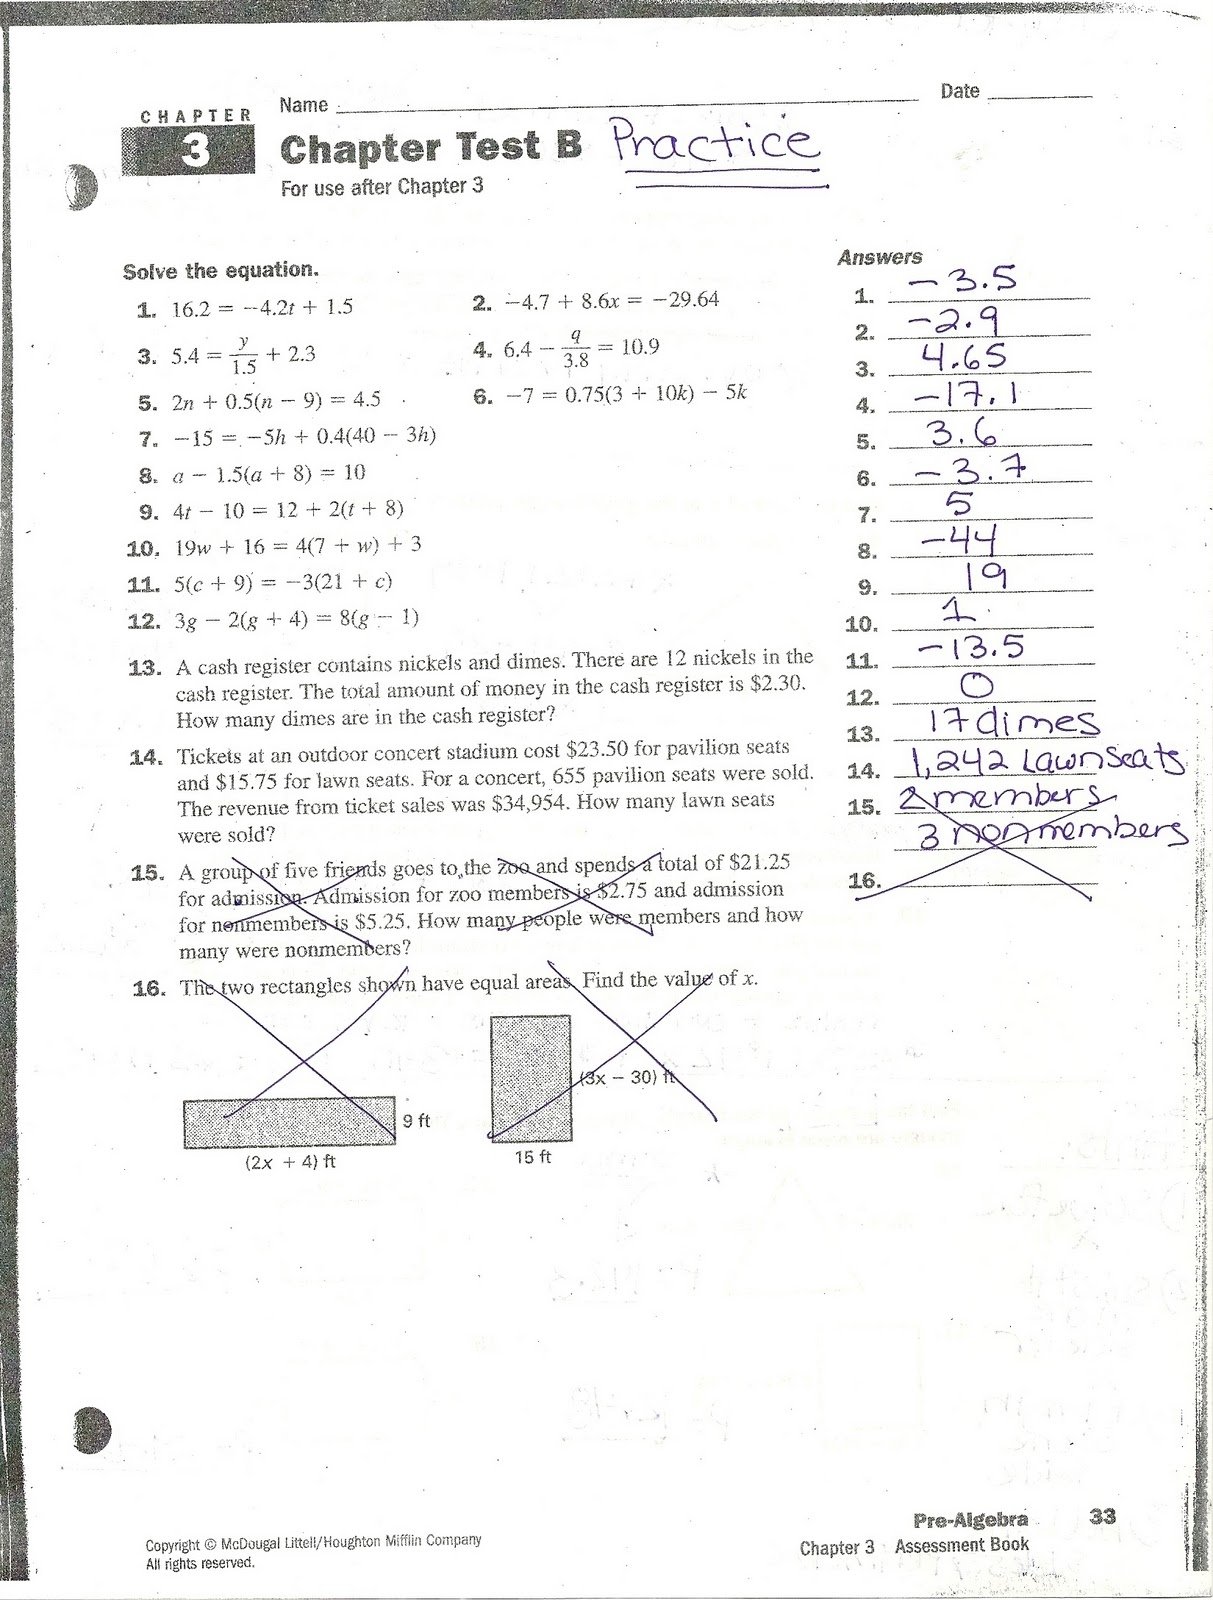 10 Elegant Big Ideas Math 7 Answers mrs whites math class chapter 3 practice problems answers 8 2022